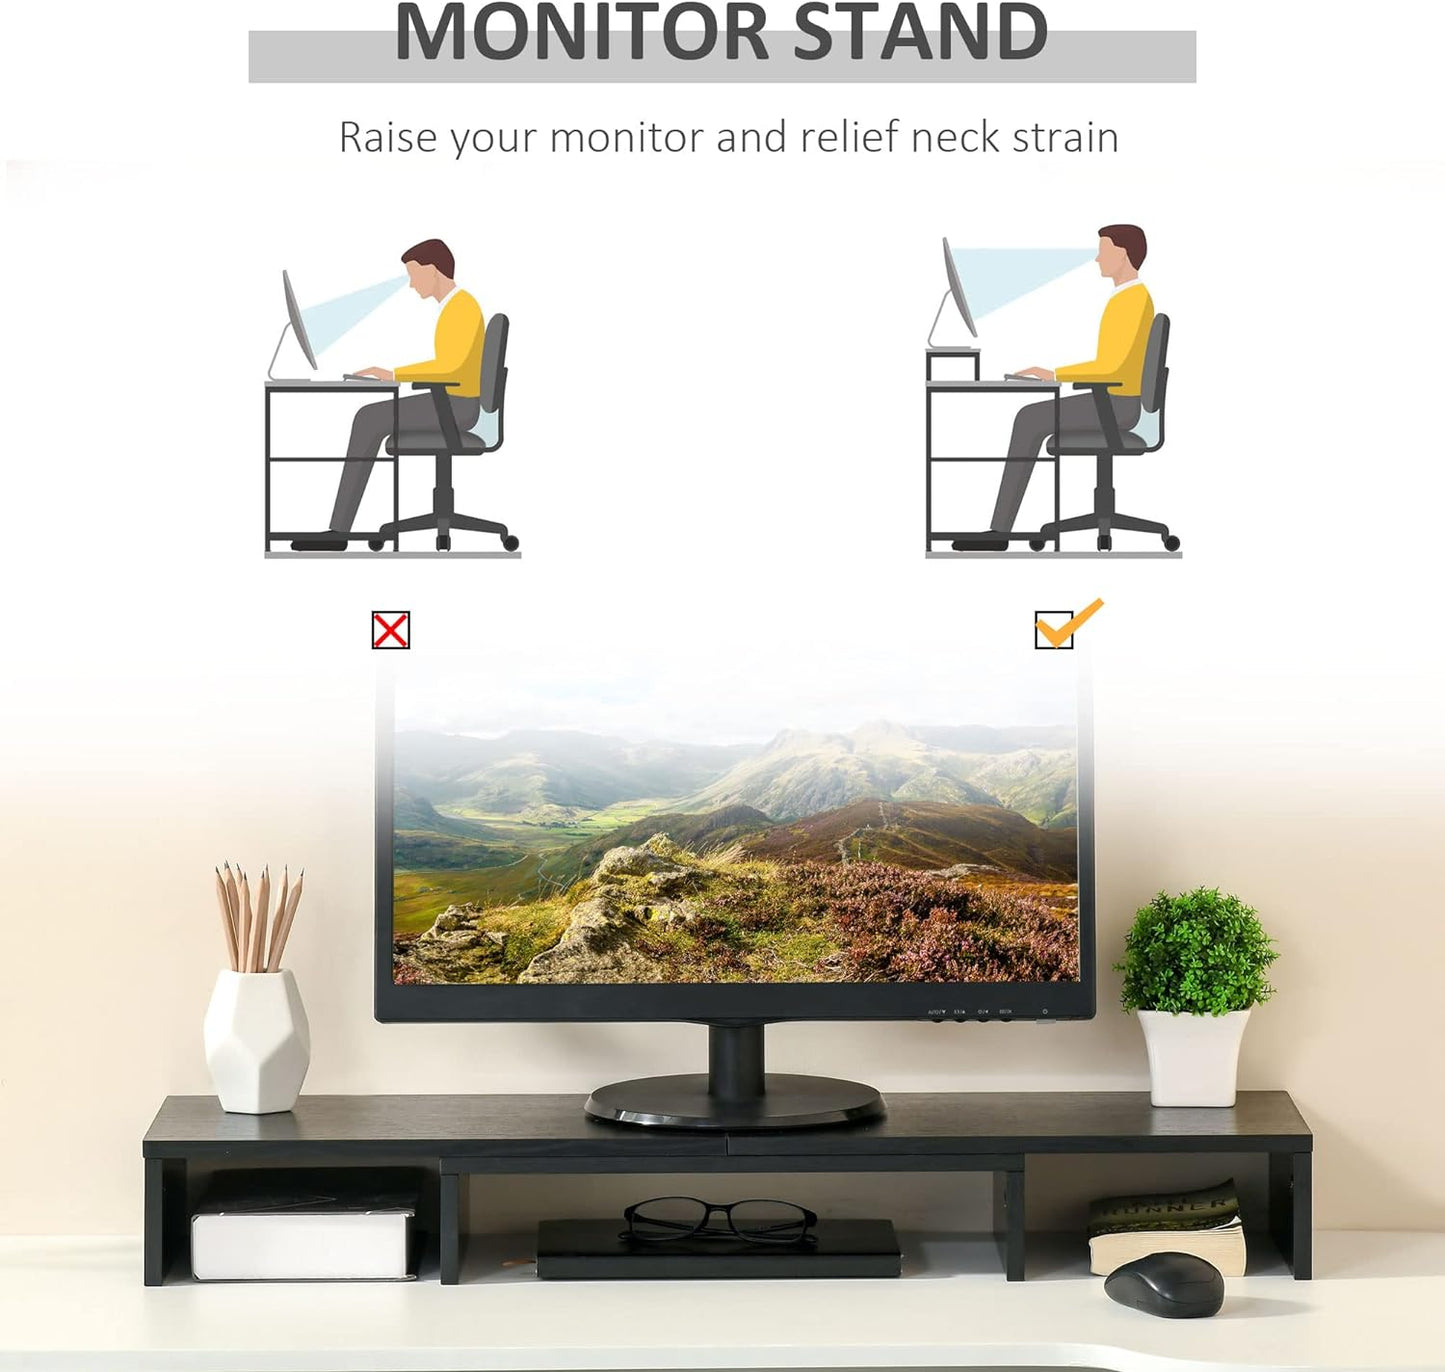 ProperAV Extra Dual Monitor Stand Riser with Adjustable Length & Angle - Black - maplin.co.uk